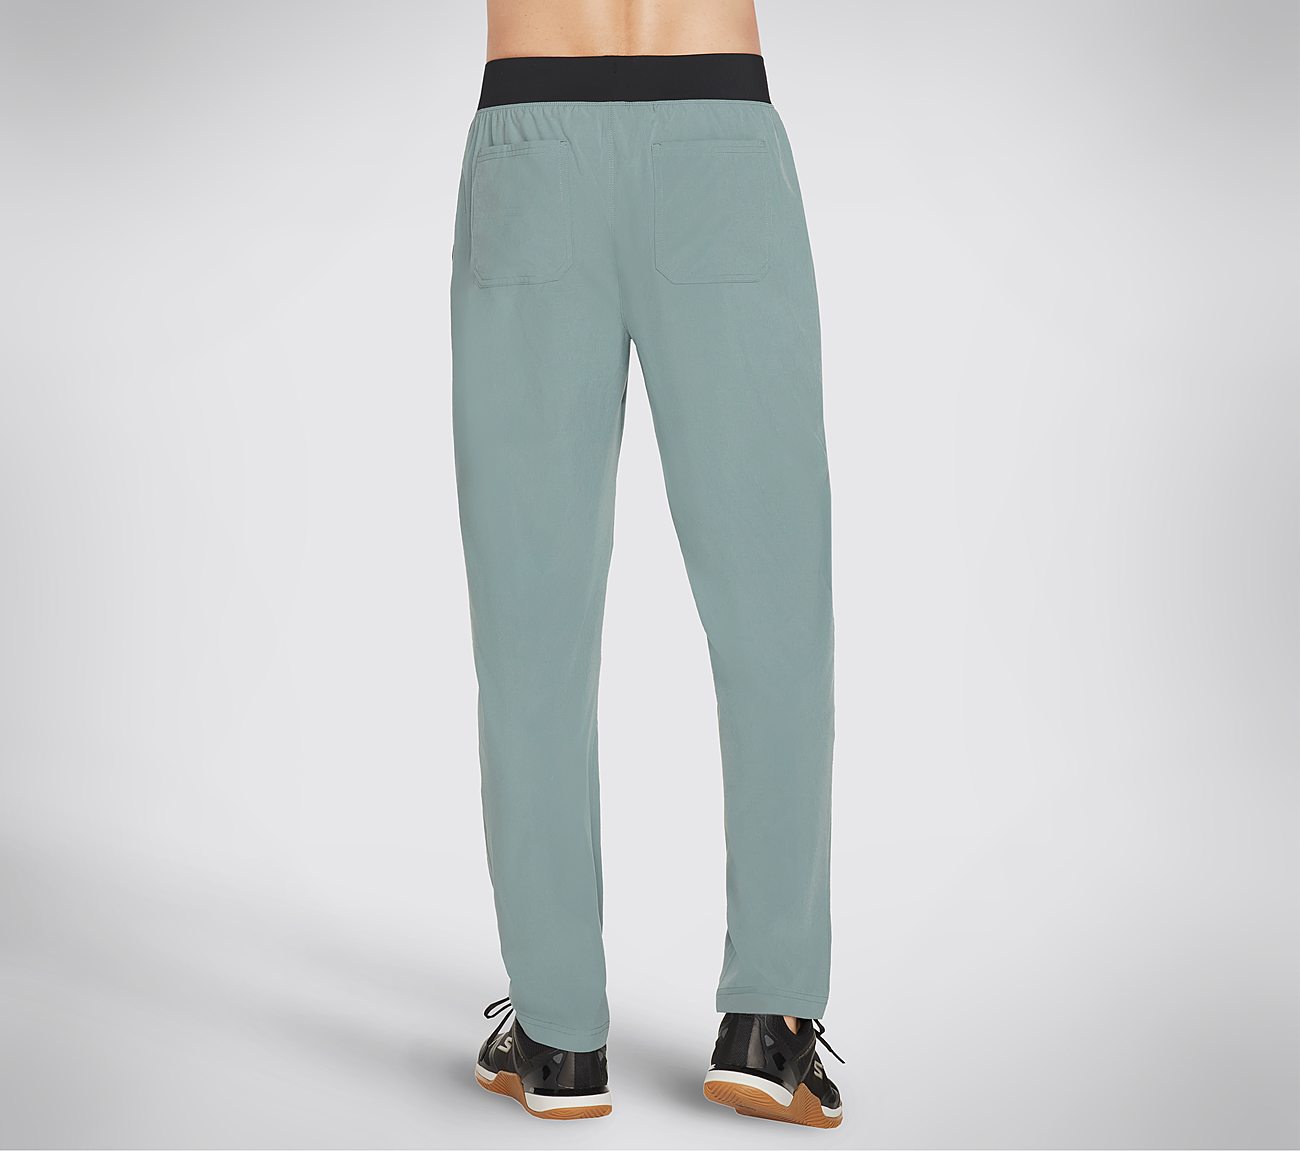 GO WALK ACTION PANT, TEAL/BLUE Apparels Top View